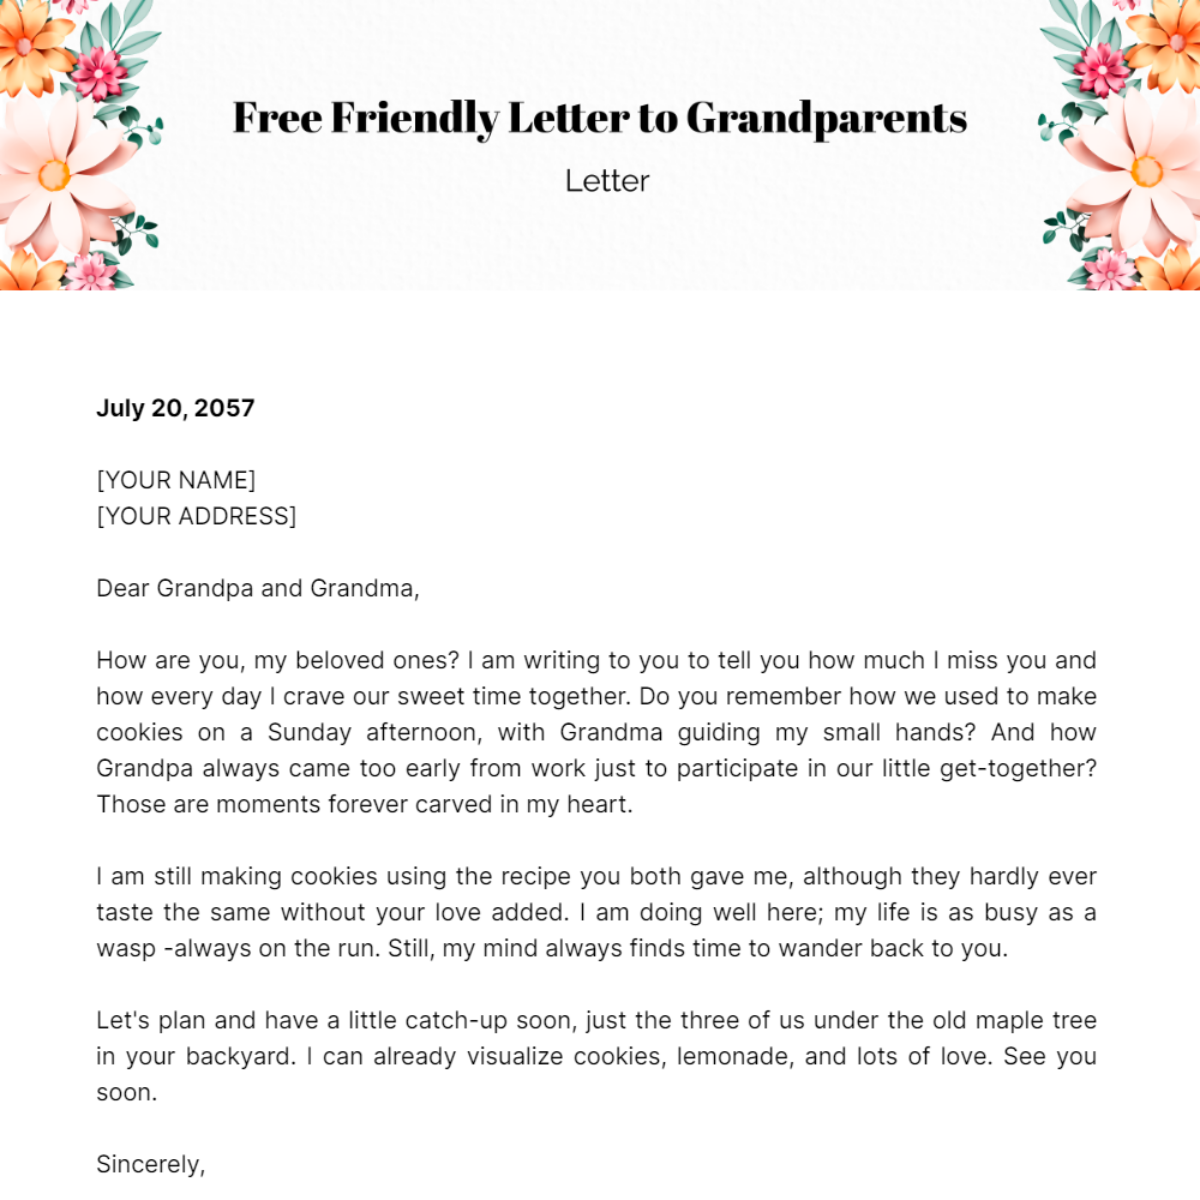 Friendly Letter to Grandparents Template